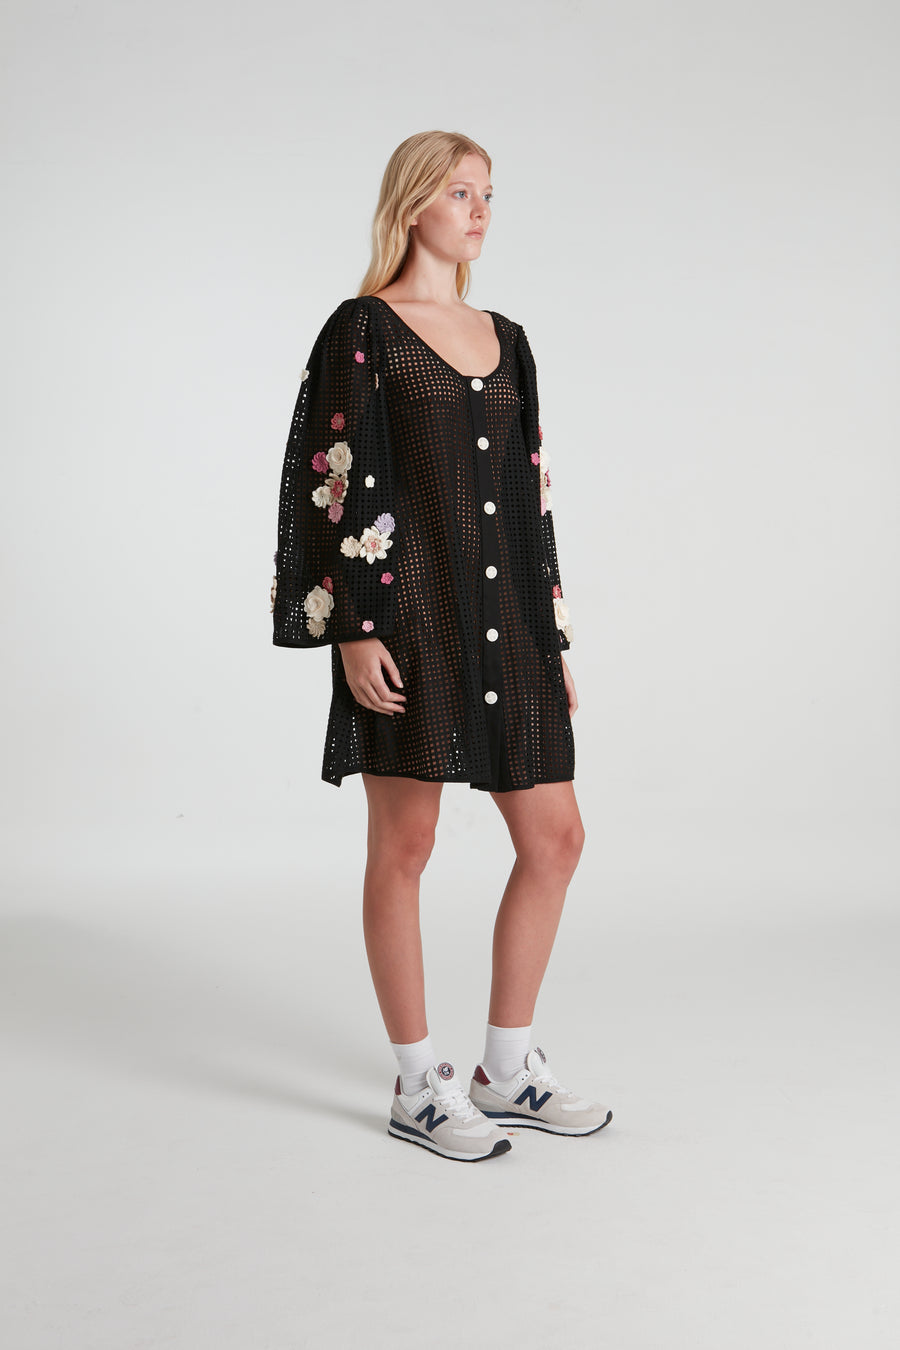 Black stenciled short dress decorated with knitted flowers